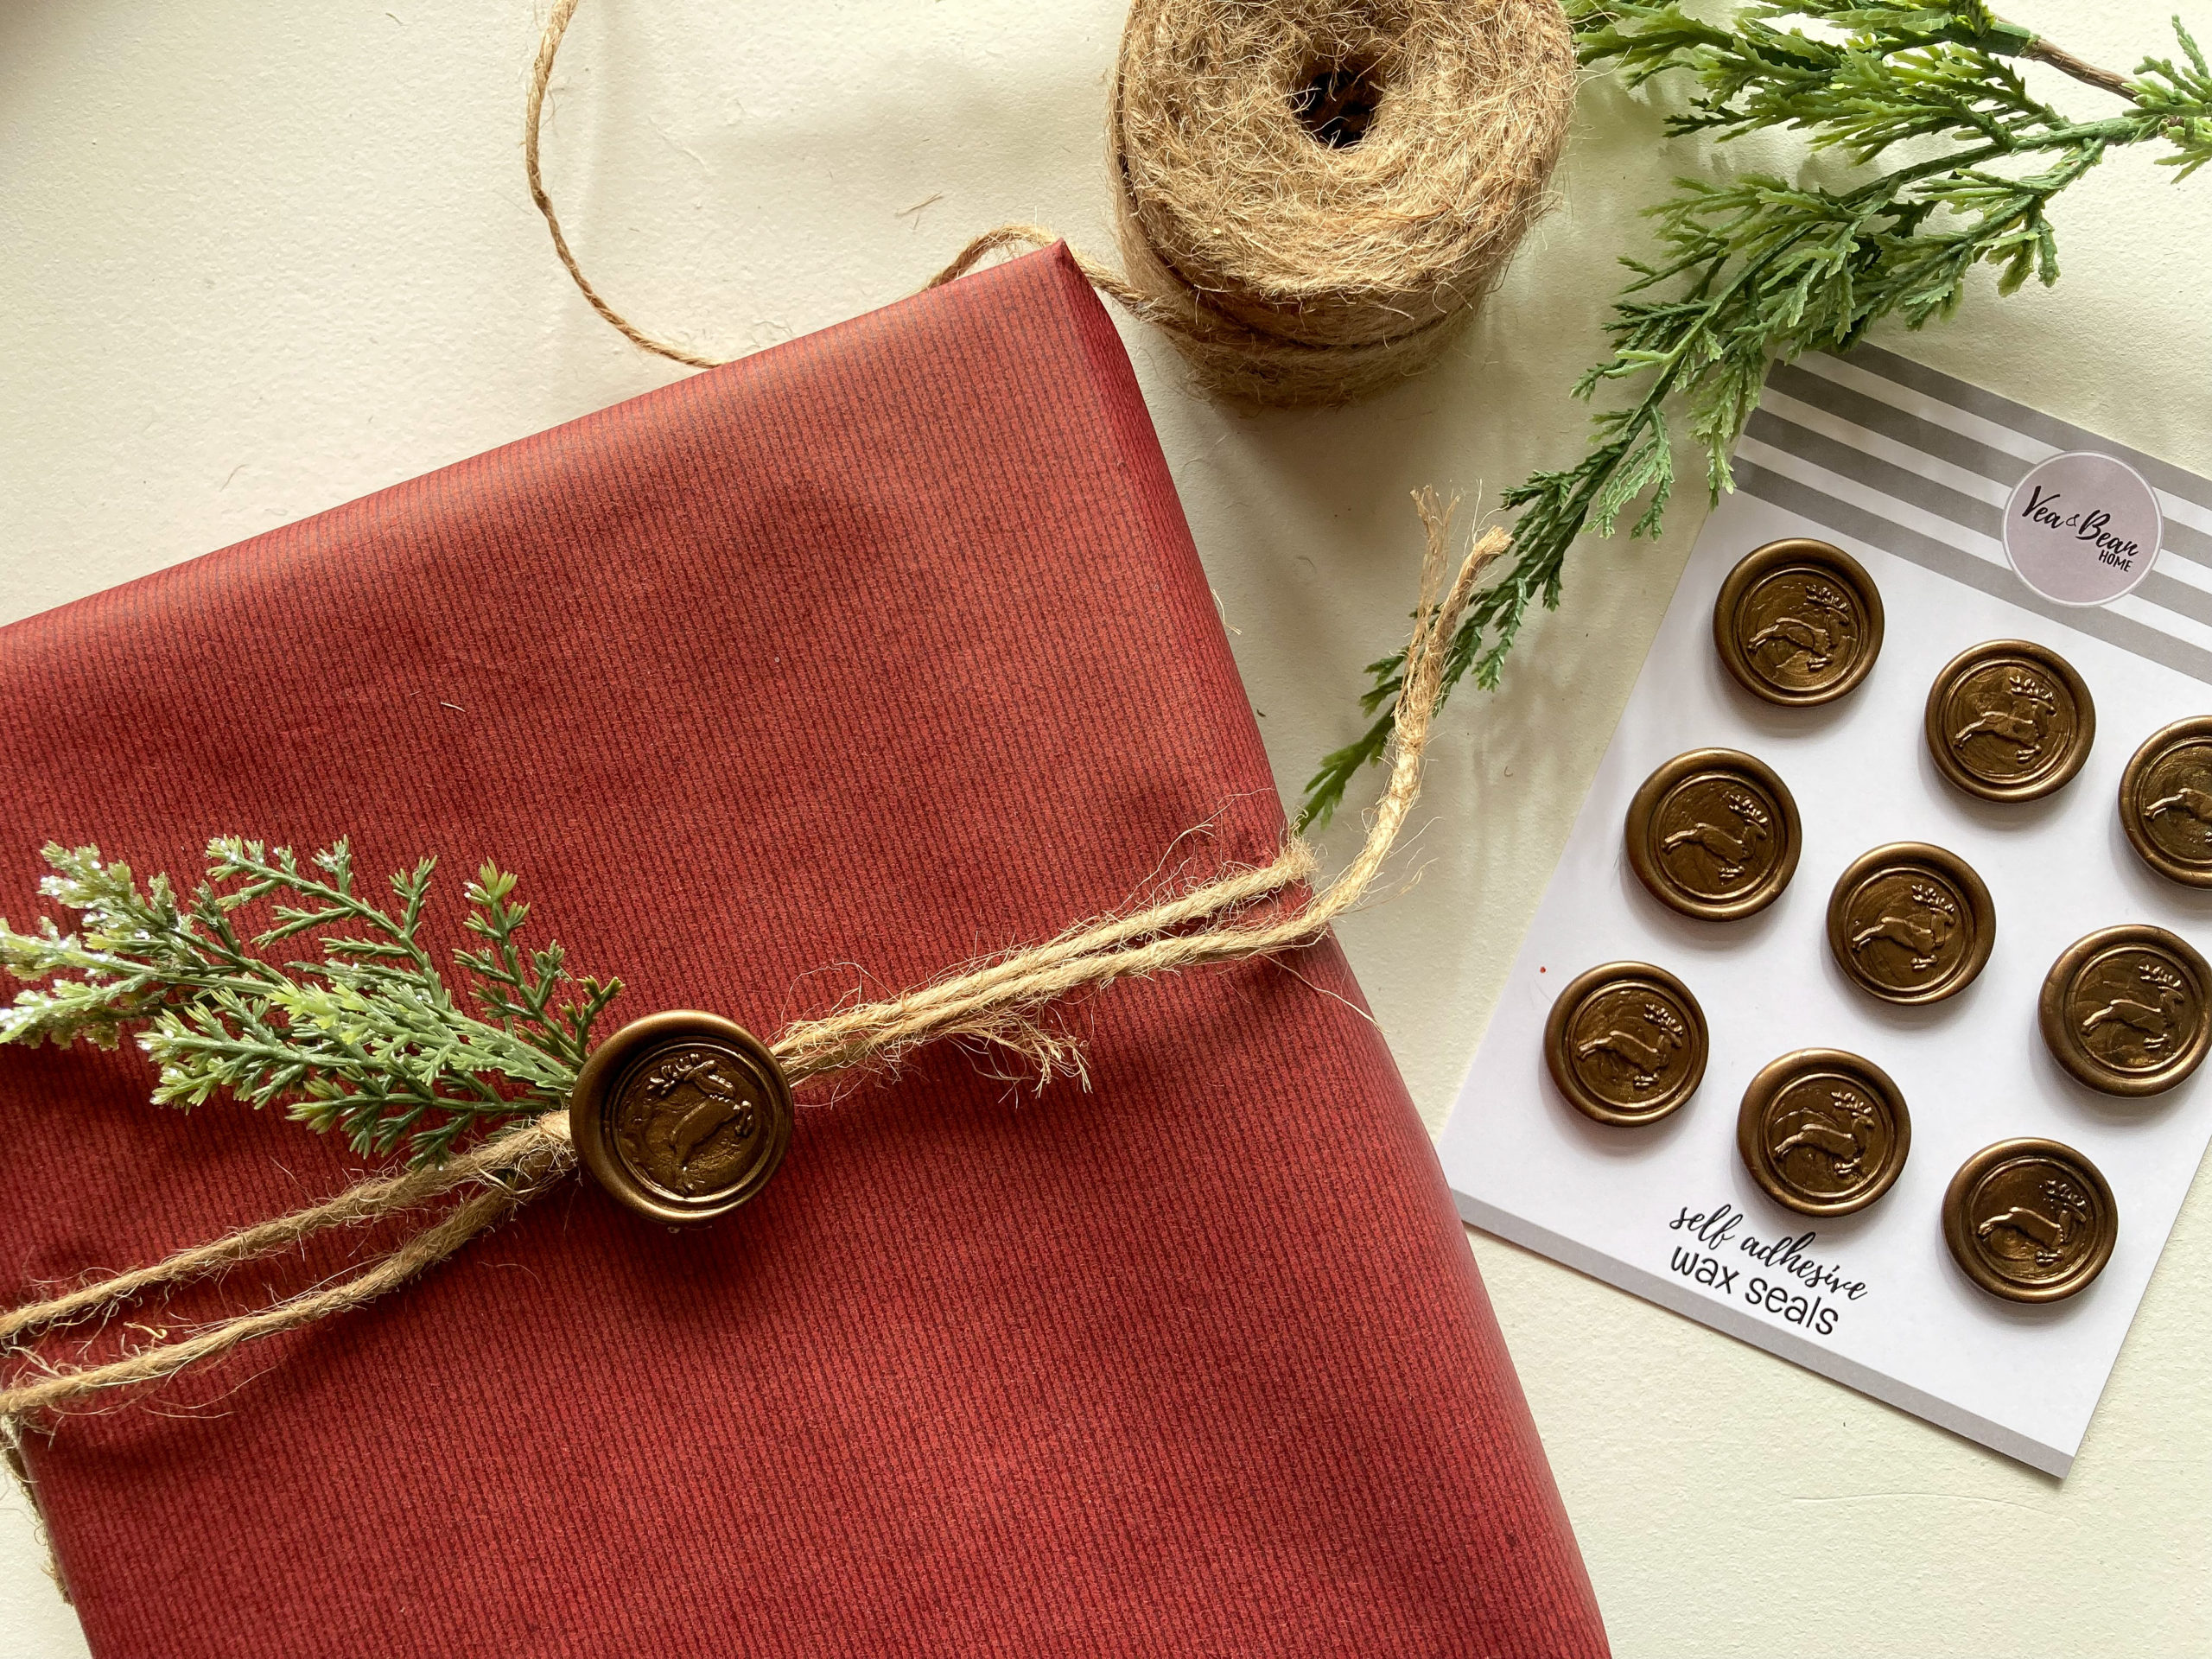  25 White & Gold Wax Seal Stickers - Wax Seals for